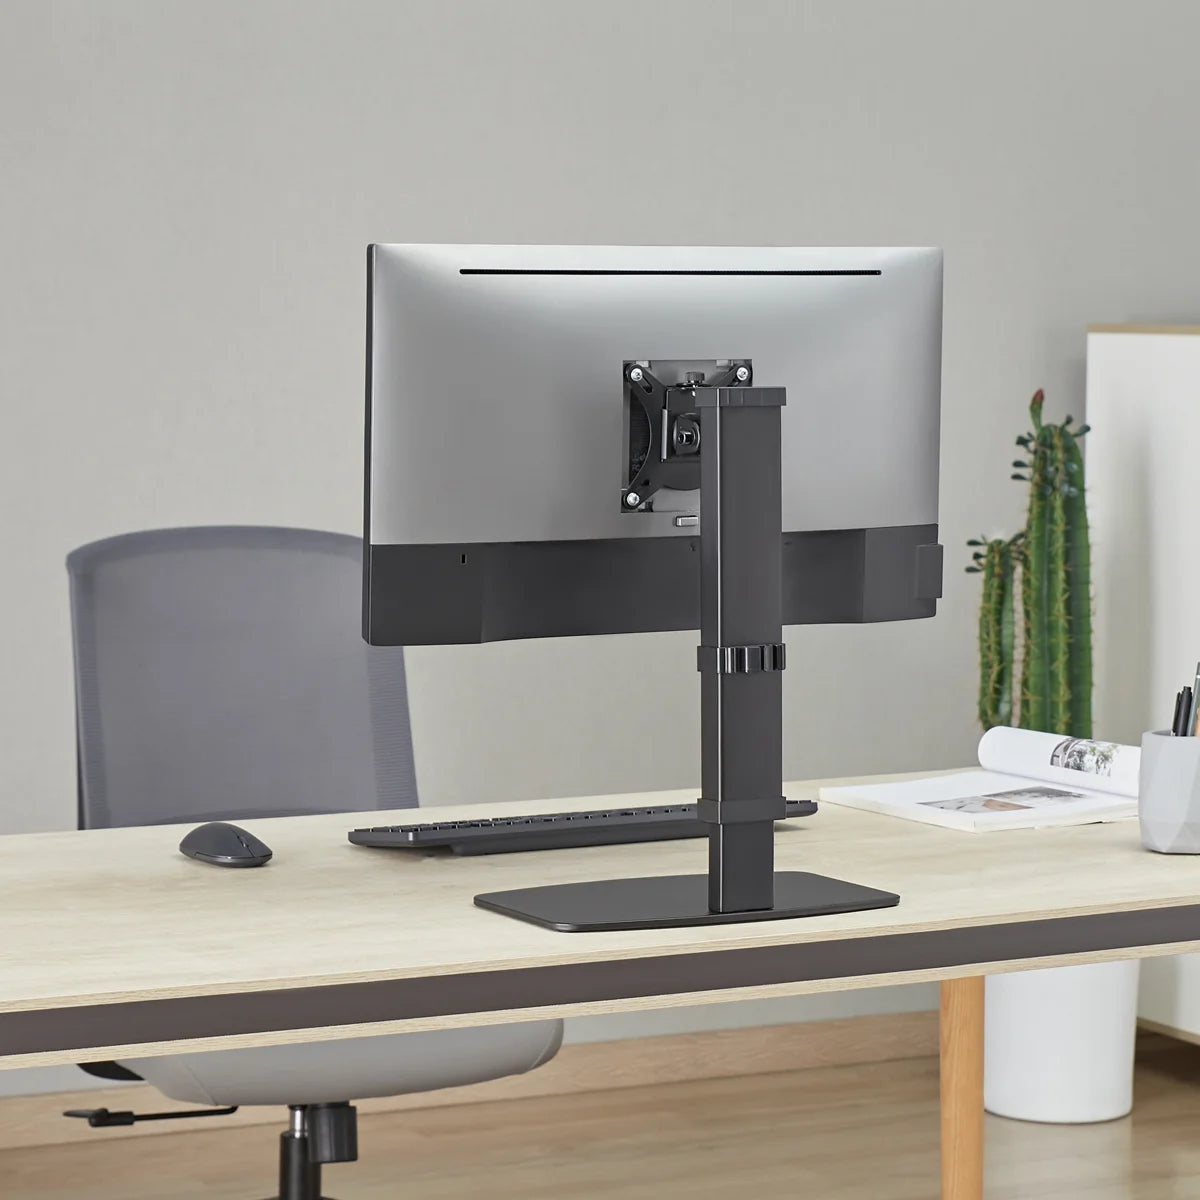 SkillTech - SH 67 T01 - Free-Standing Vertical Lift Steel Monitor Mount Stand